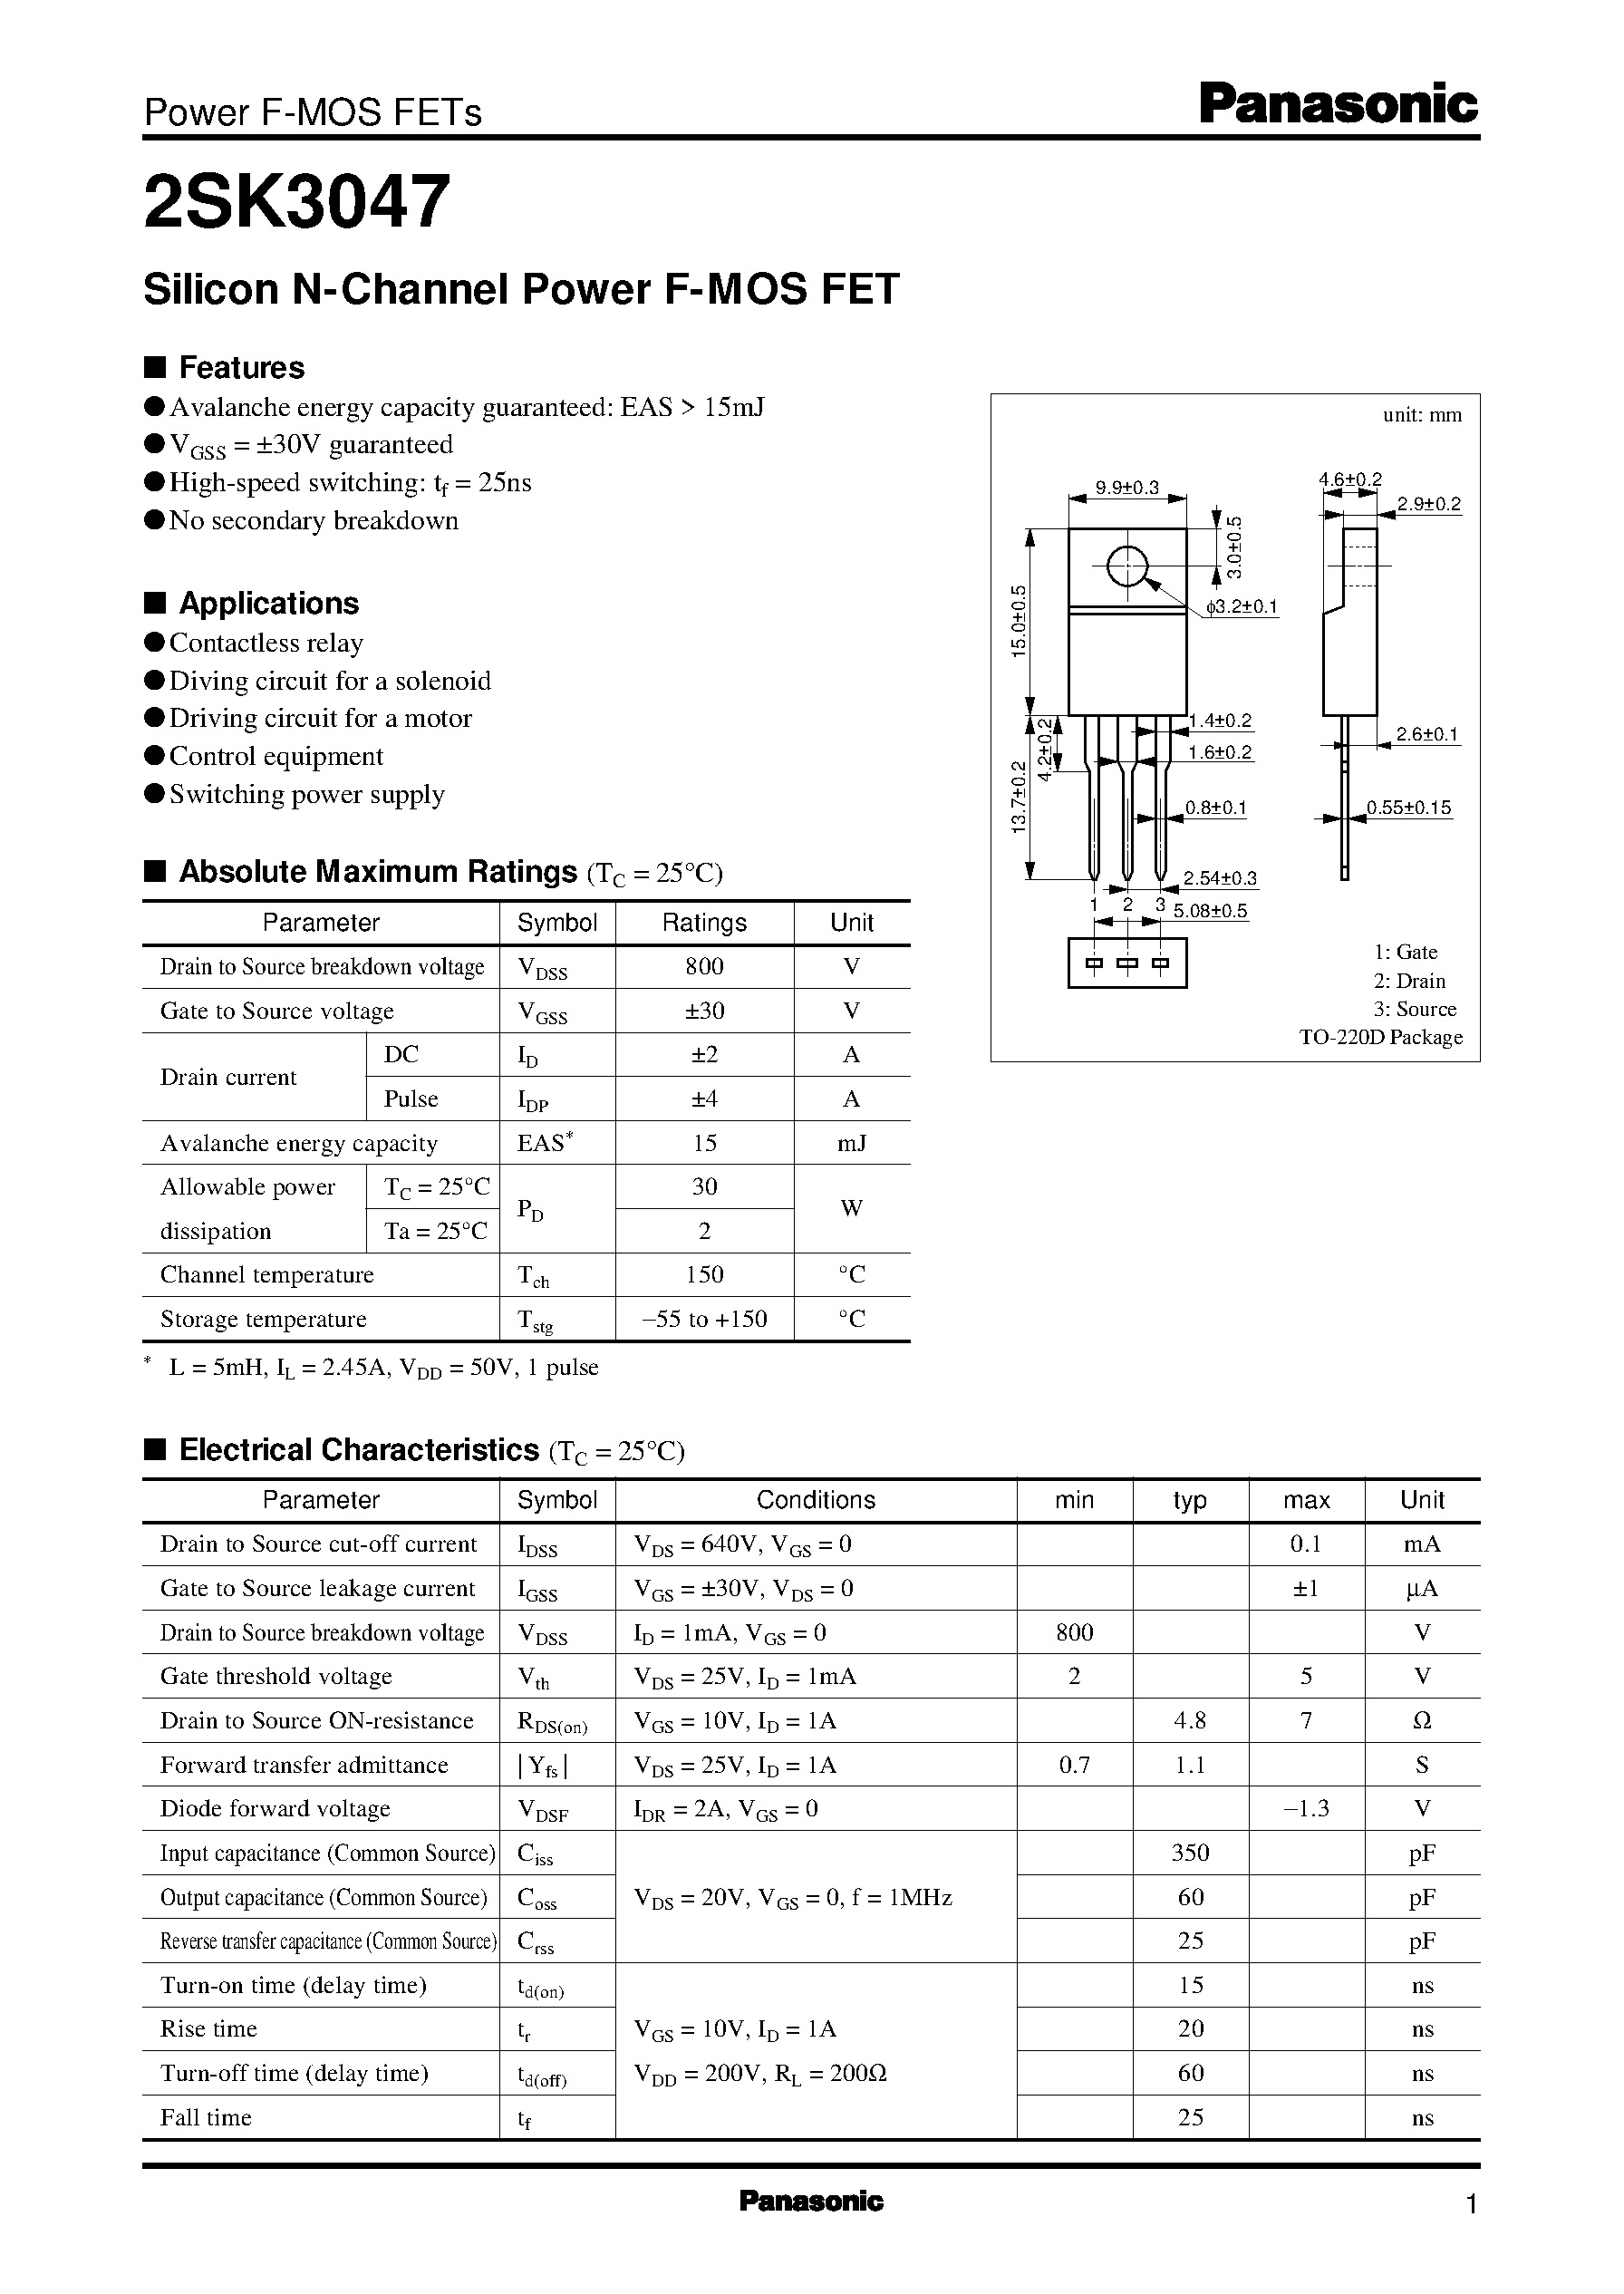 Datasheet 2SK3047 - Silicon N-Channel Power F-MOS FET page 1